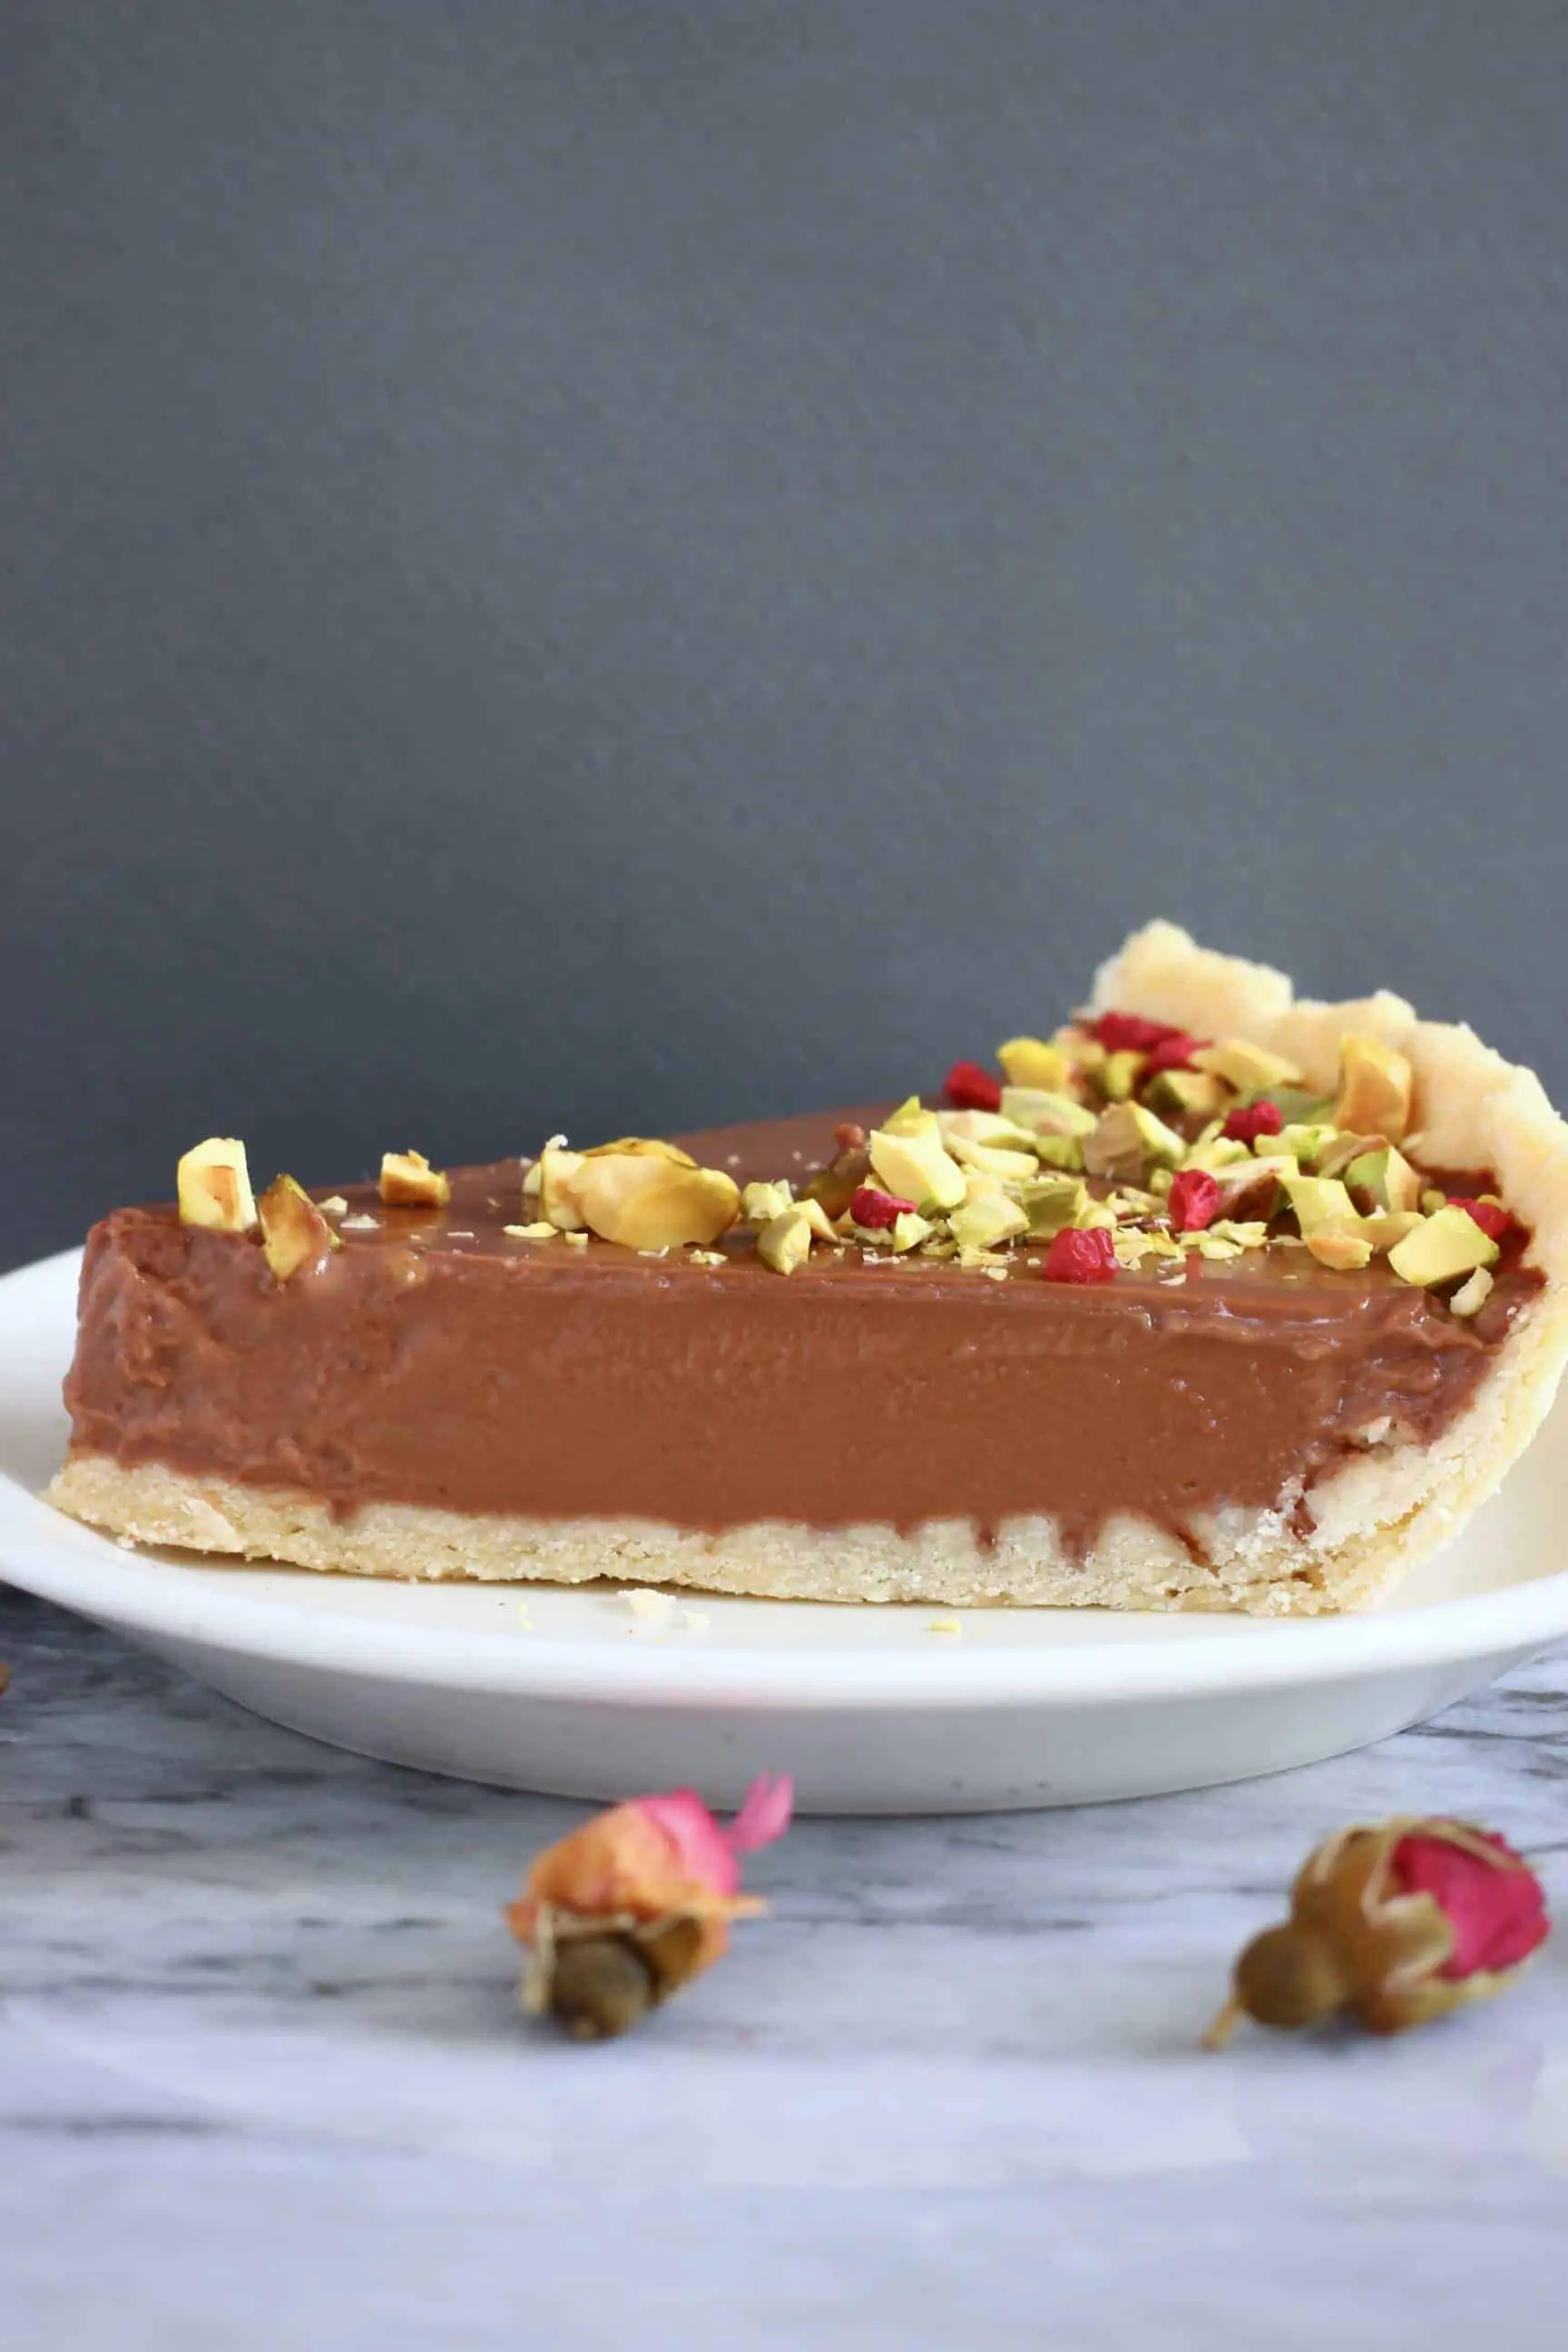 A slice of gluten-free vegan chocolate tart topped with chopped pistachios and freeze-dried raspberries on a plate